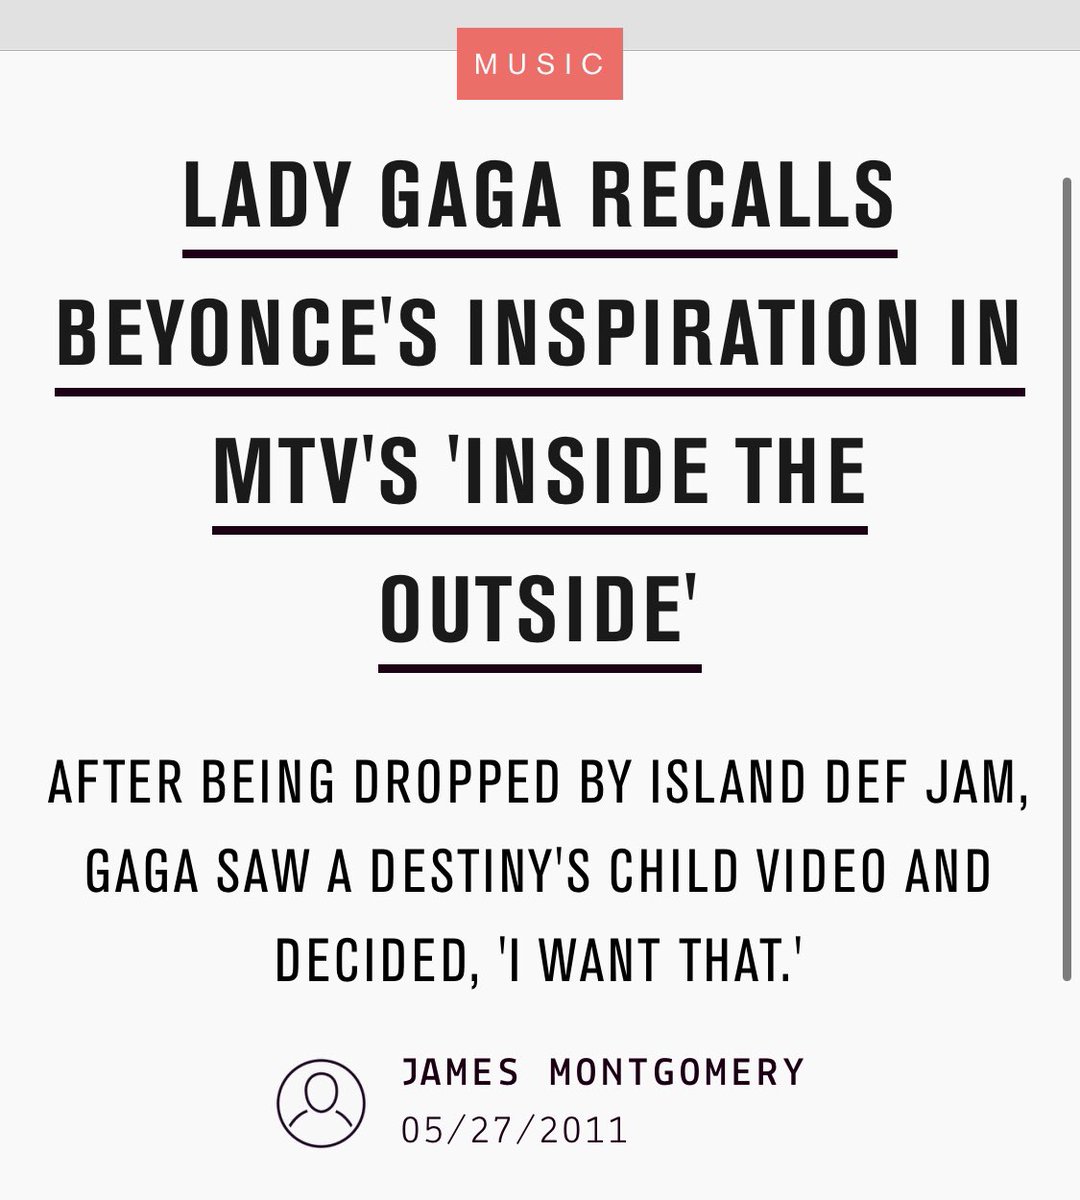 This is shown by the likes of Ariana Grande and Lady Gaga, who have admitted they were inspired to start singing because of her, as well as Rihanna, who Beyoncé played a role in helping get signed to a label.